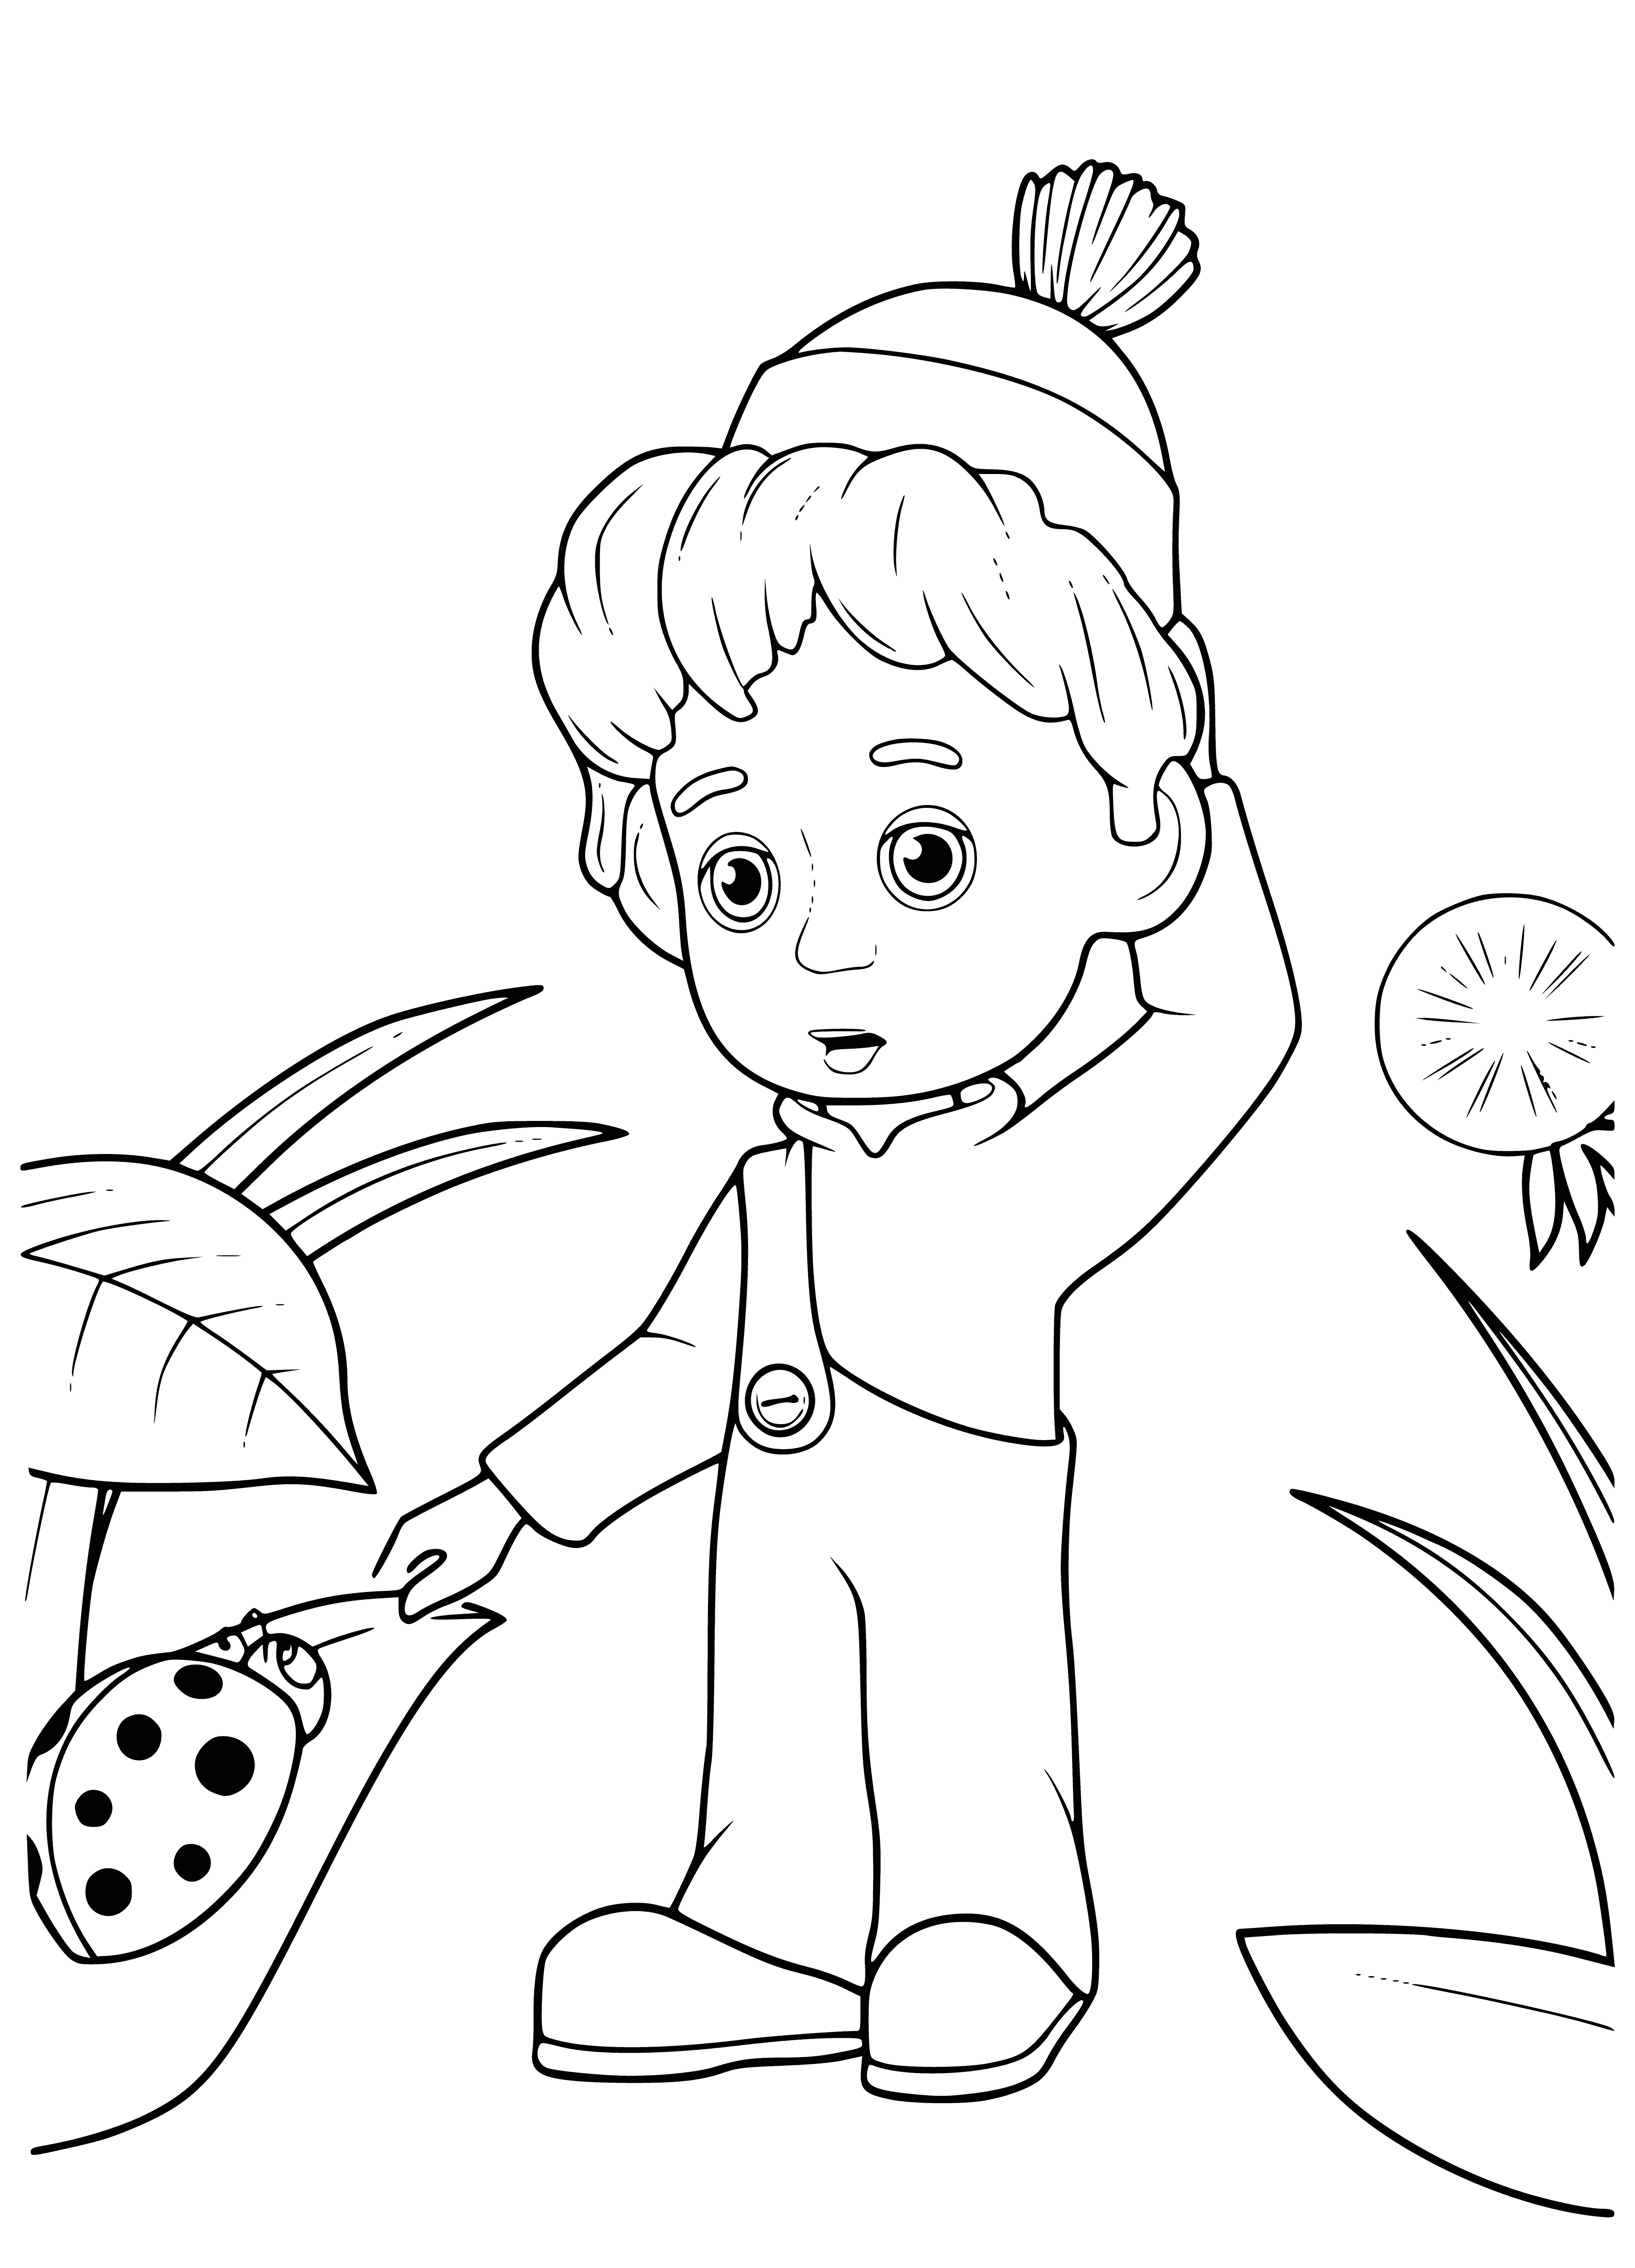 coloring page: Boy stands on hill with sheep, backpack on, ready to explore city in the distance. #AdventureAwaits